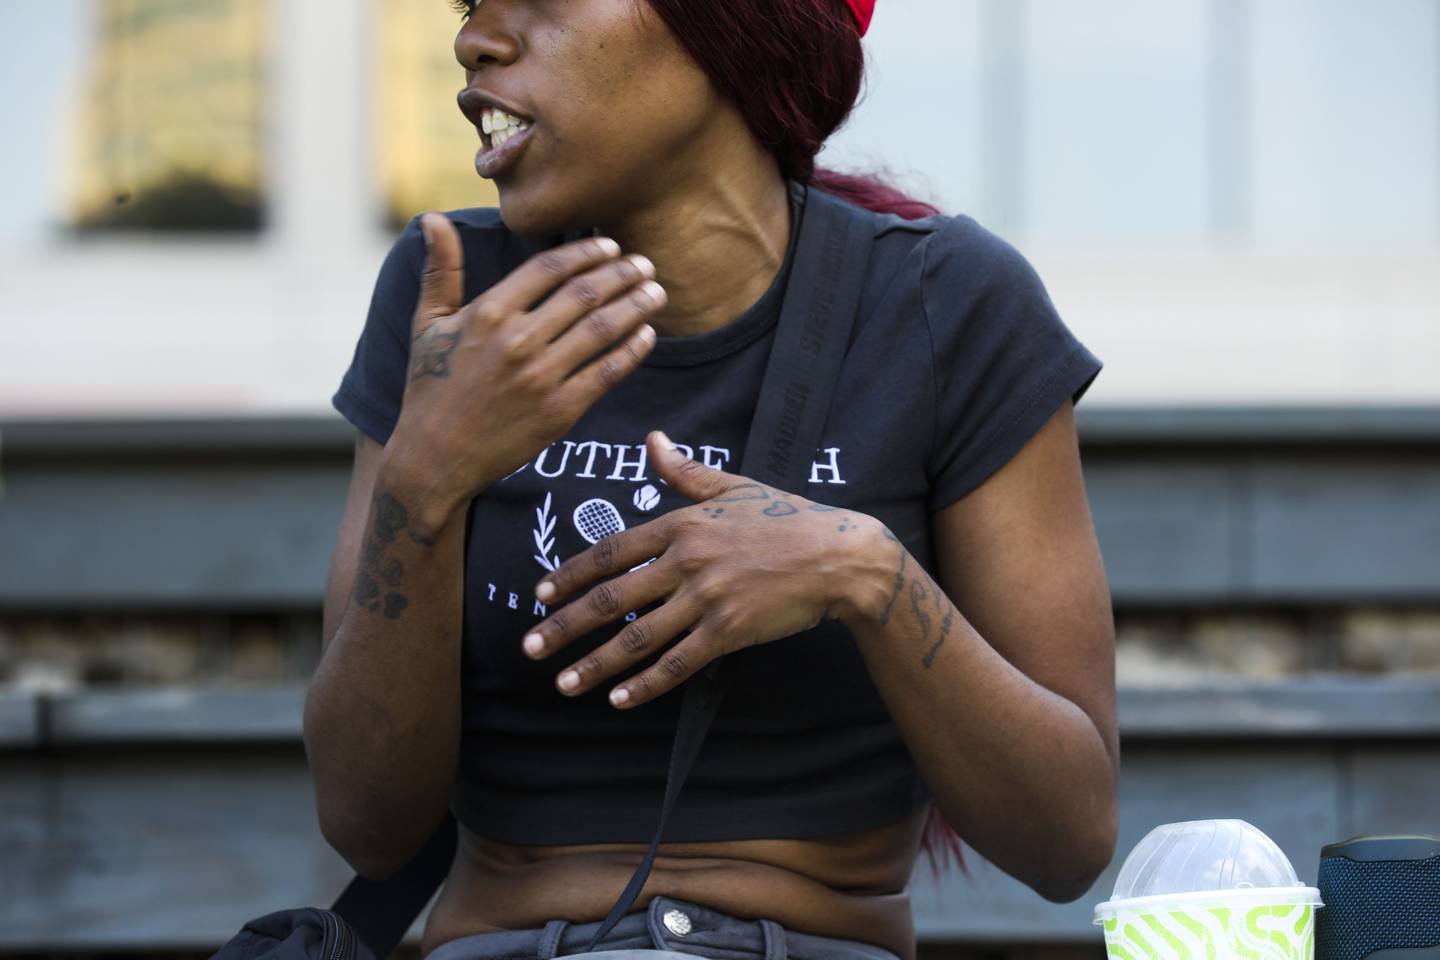 Aijah Gatson, 31, mother of the juvenile charged with murder in the squeegee shooting case, talks with reporters at McKeldin Square on August 3, 2022. She is accompanied by her other son, Tyree Gatson, 9, and her niece Milan Gatson, 11. She was on the phone with her son who is currently in custody.